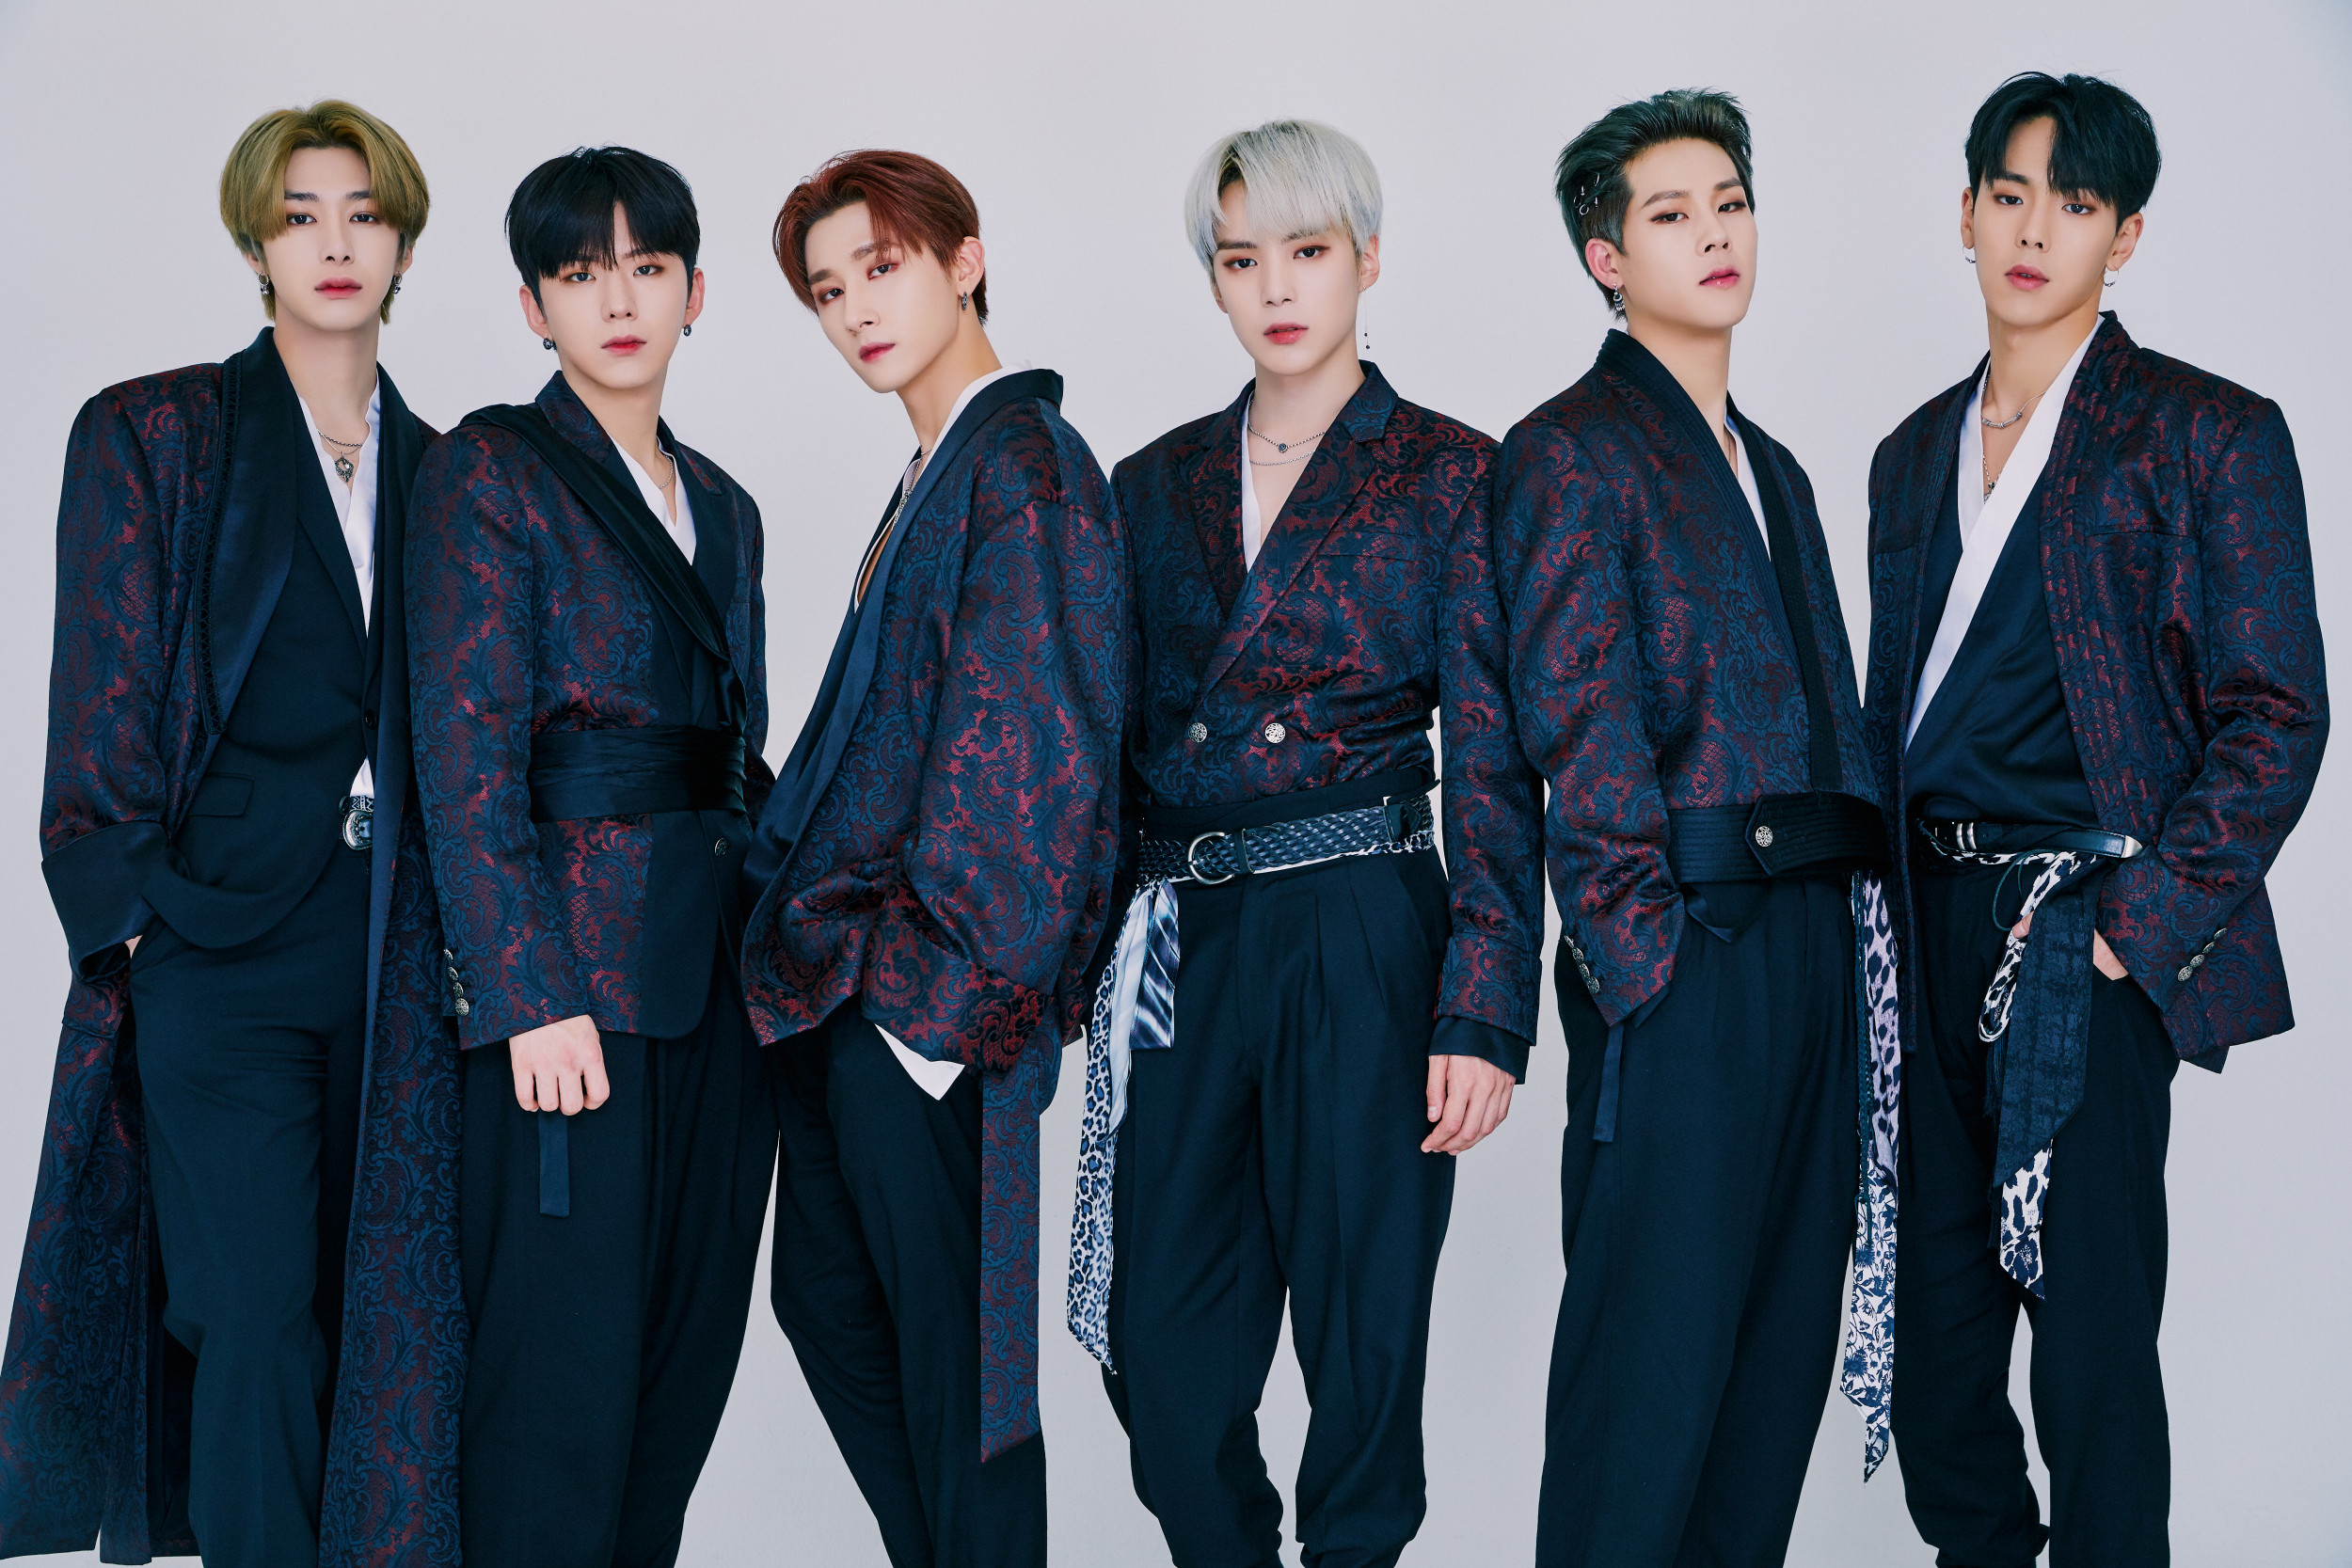 AllAboutLuv Trends as K-Pop Group Monsta X Releases New Album on